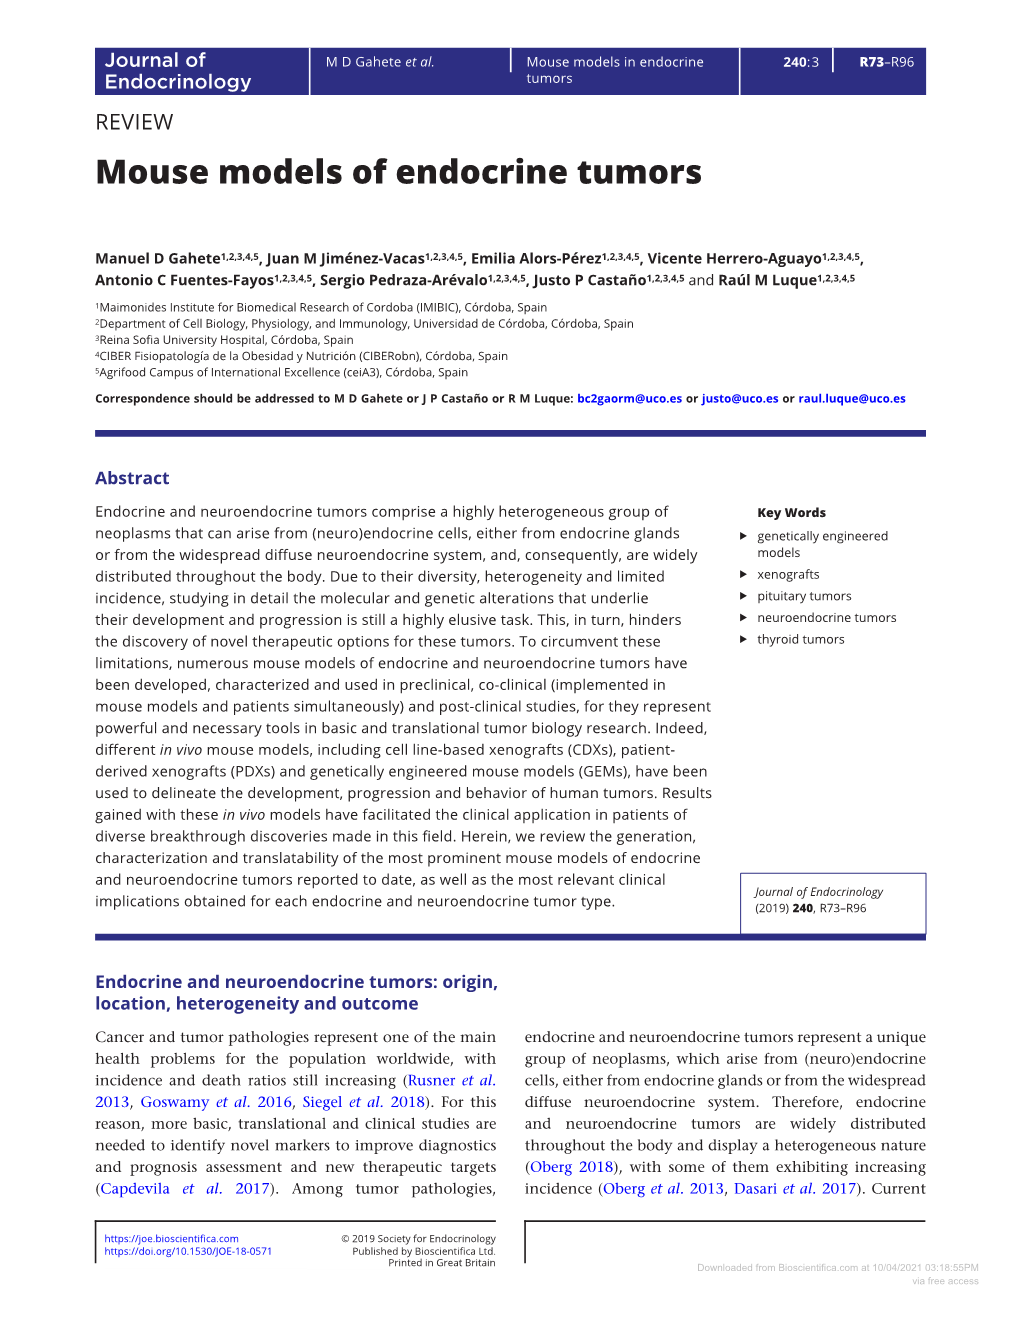 Mouse Models of Endocrine Tumors